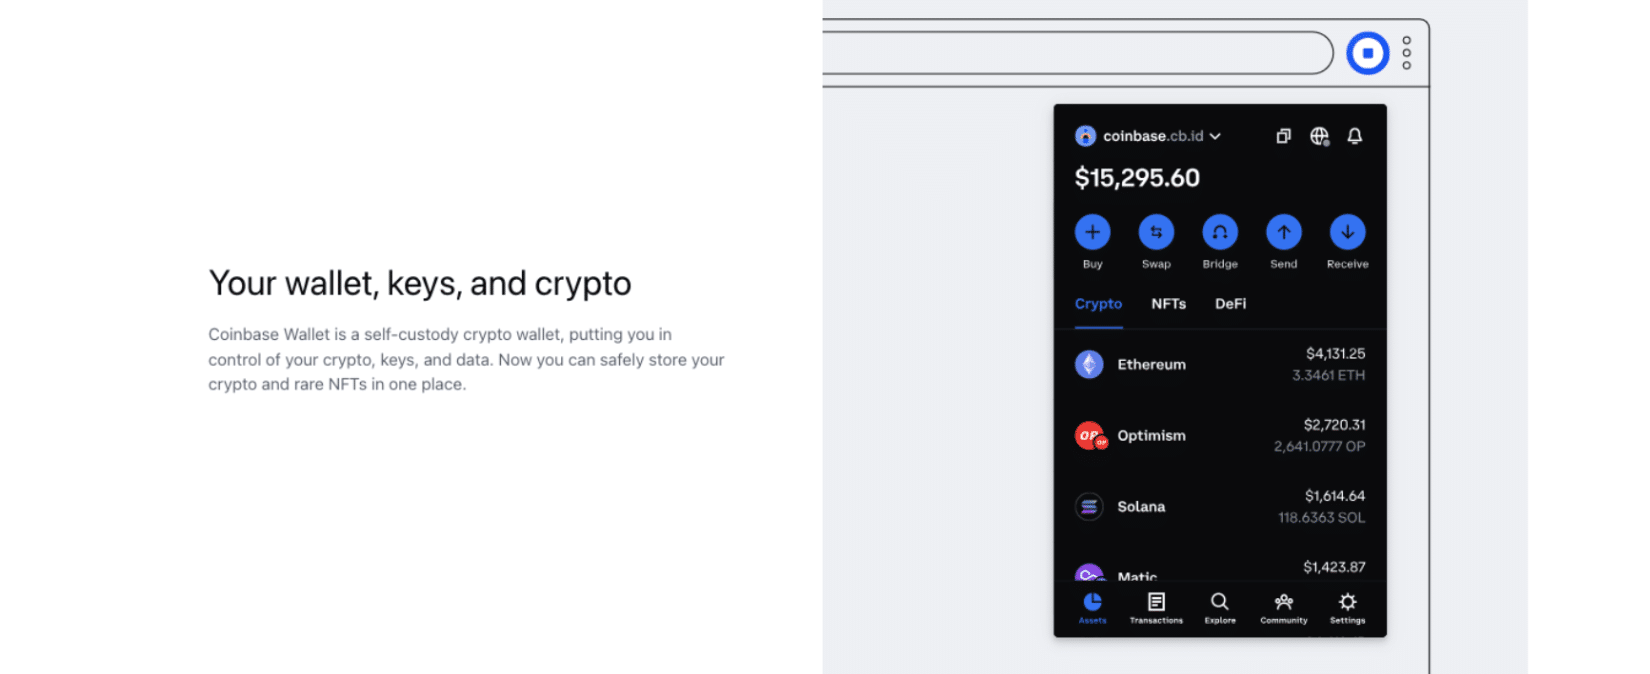 With respect to Coinbase wallet safety, the platform employs stringent measures like two-factor authentication and biometric logins to secure users' assets.